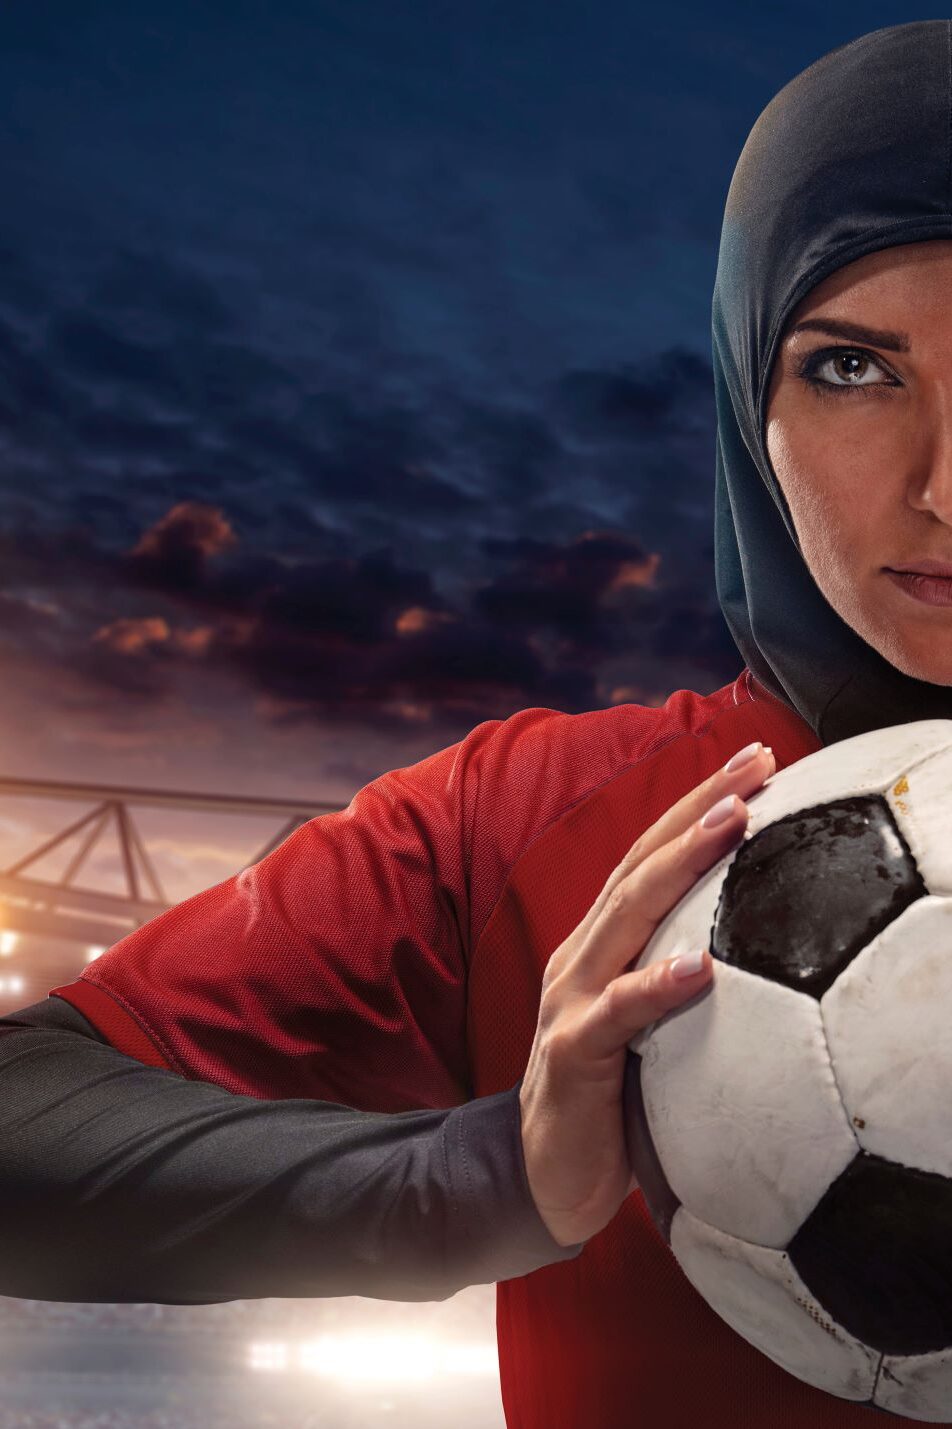 The World Cup 2022 and Women’s Empowerment in Qatar